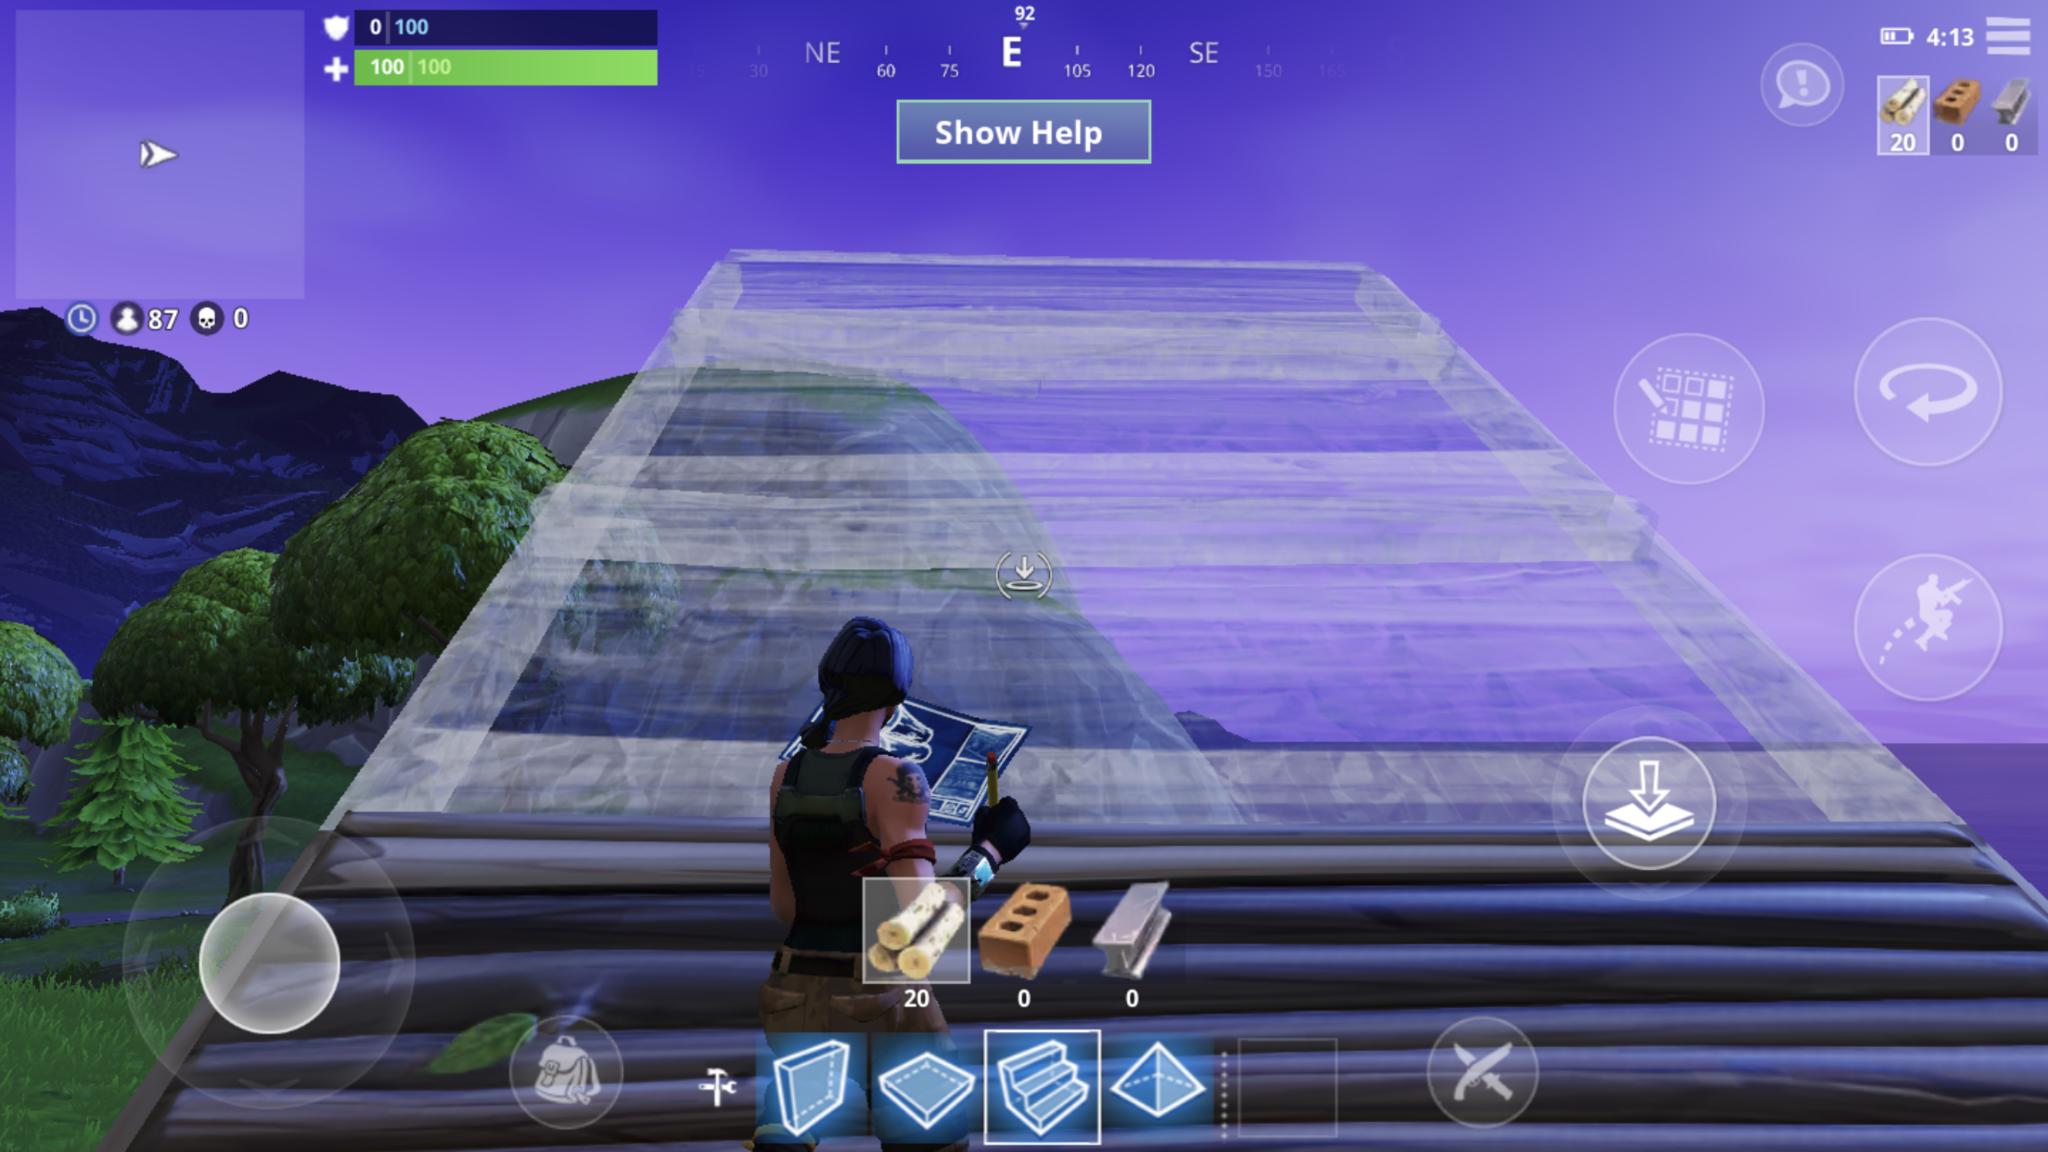 build a structure - fortnite xbox keybinds not working